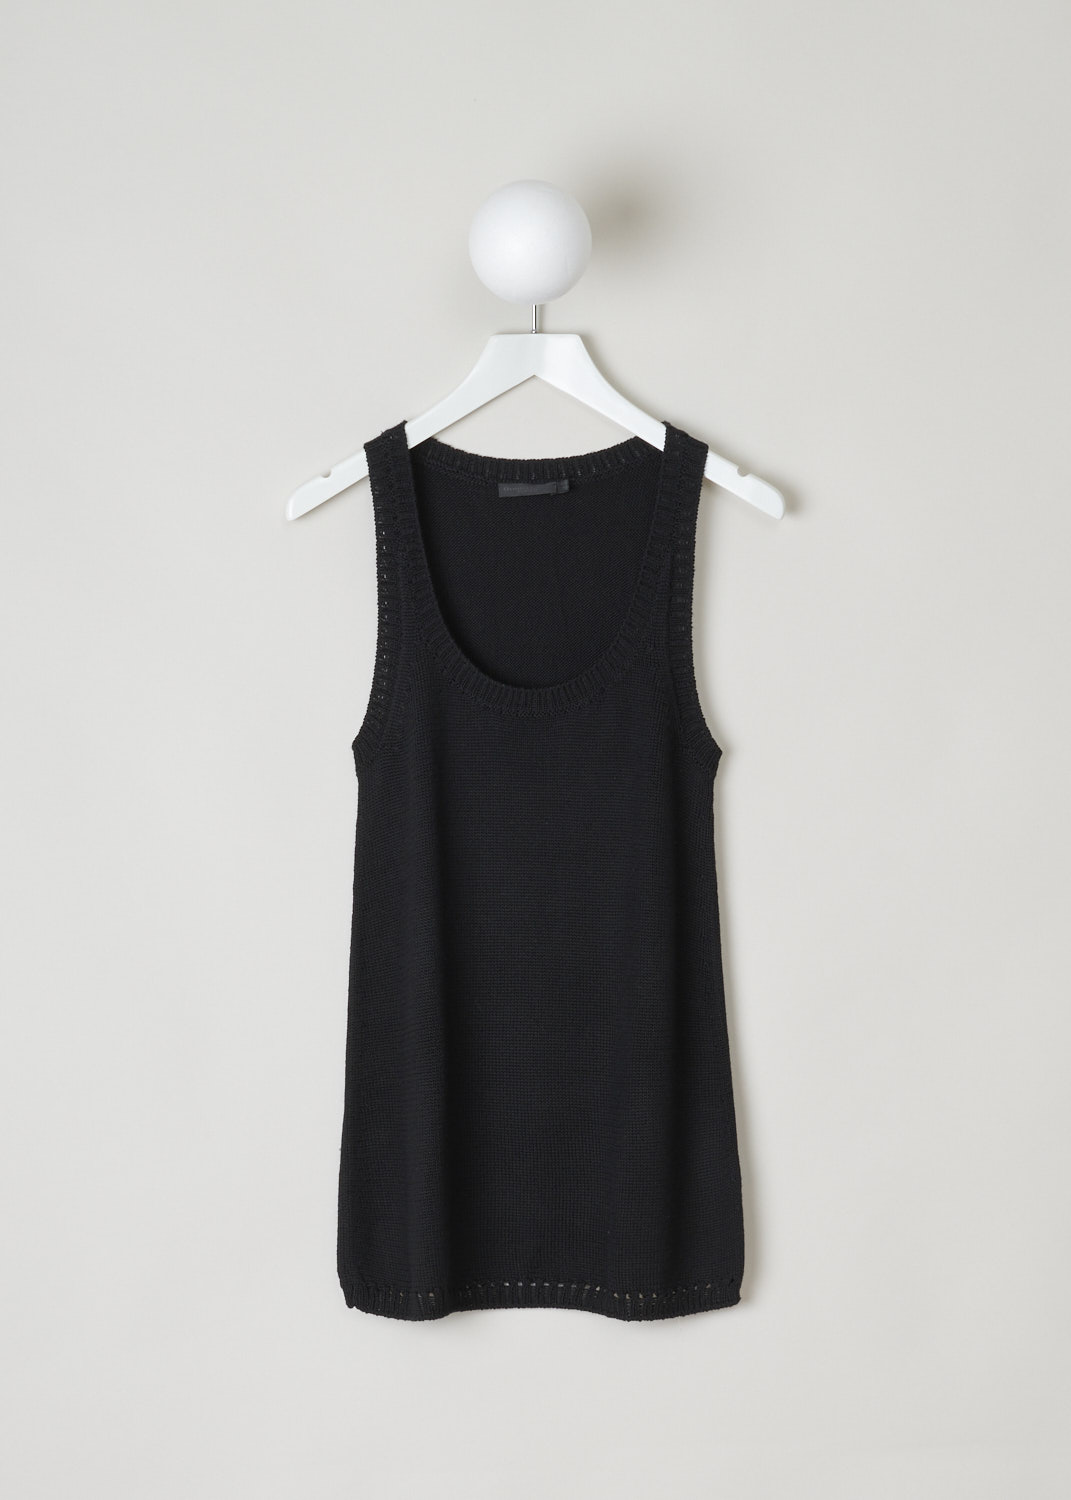 Donna Karan, Black knitted tank top, A14T929Y06_001_black, black, front, Made from a luxurious blended fabric being silk with cashmere. Featuring a scoop neckline with a ribbed edges, the hem is similarly ribbed. Furthermore, this model is slightly asymmetric, where the front is left longer than back.  